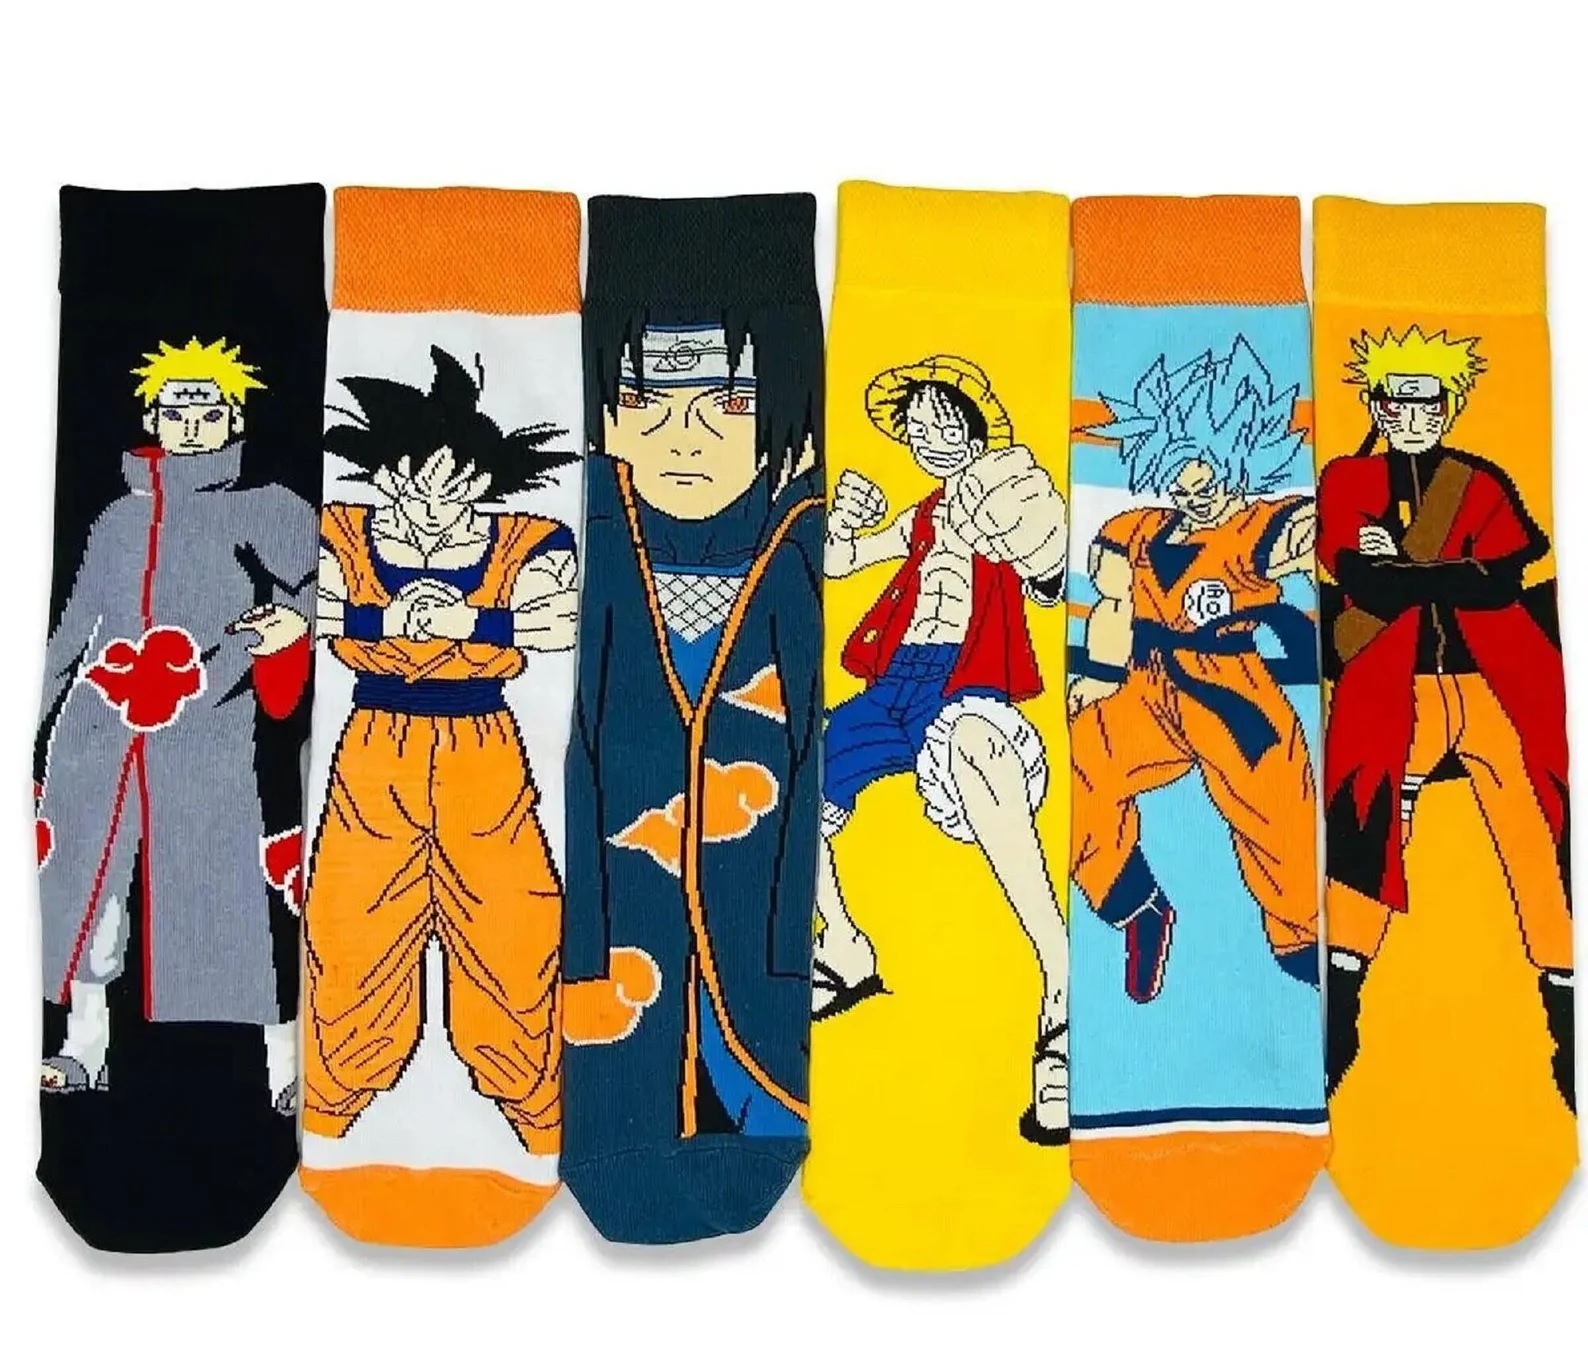 Six pairs of socks, each featuring a different anime character